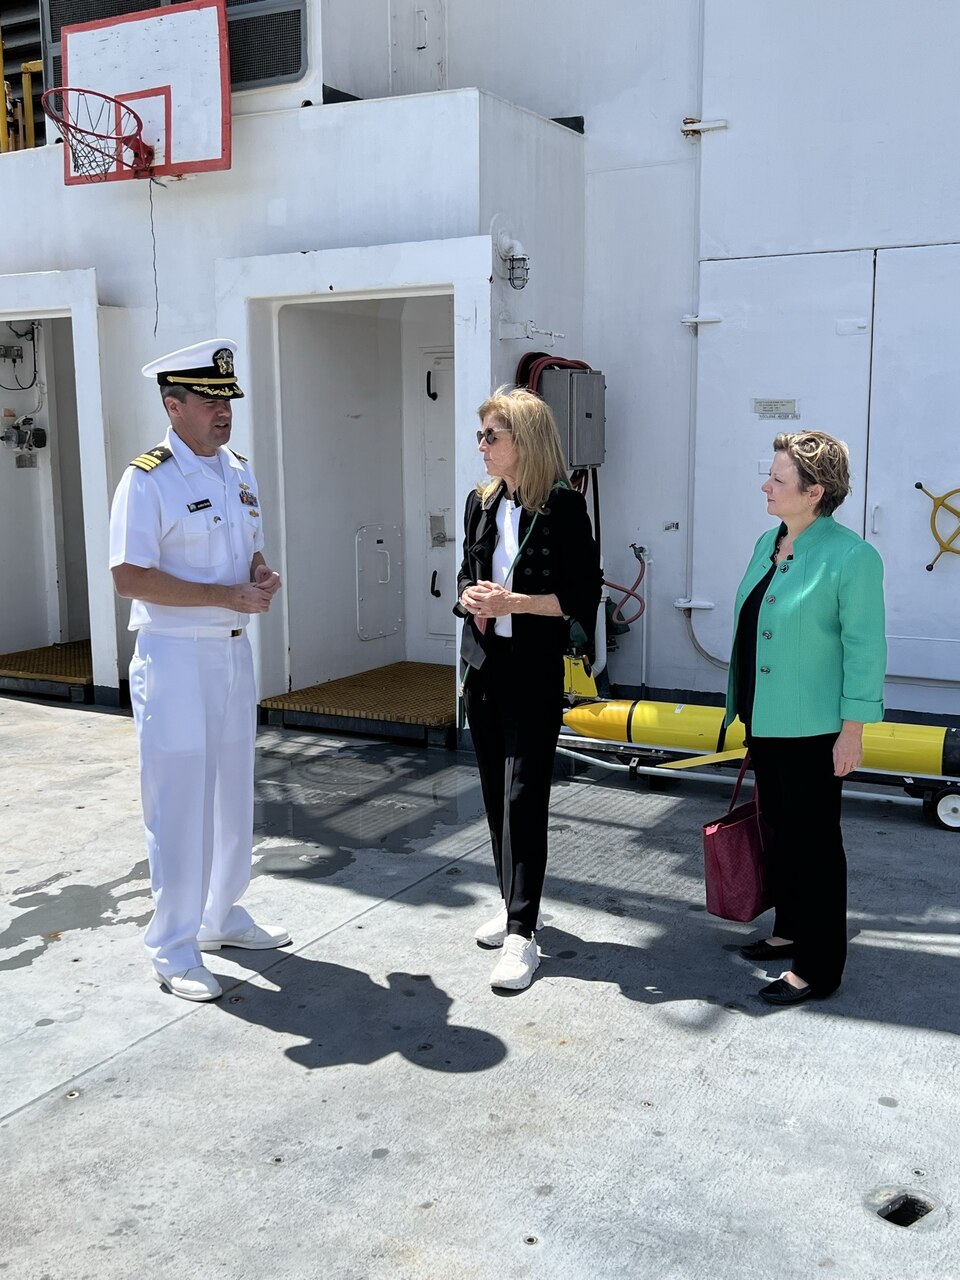 Pathfinder-class oceanographic survey ship USNS Mary Sears (T-AGS 65) hosted U.S. Ambassador Caroline Kennedy during the ship’s scheduled visit to Sydney, Australia, on Nov 8, 2022.